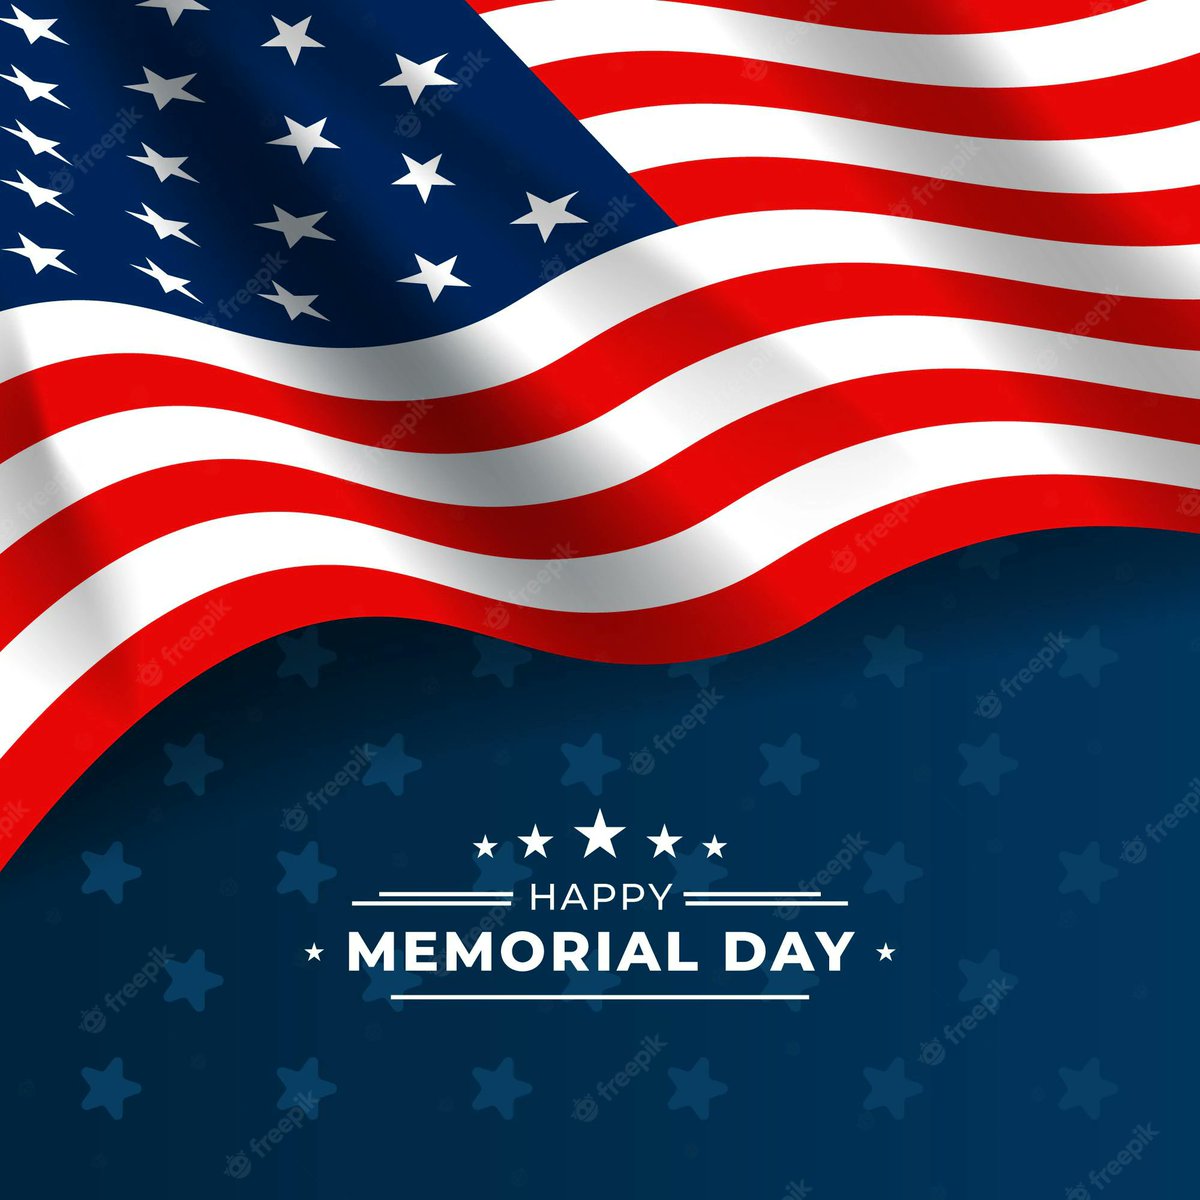 The Judicial Branch and Maine courts will be closed on Monday, May 29 in honor of Memorial Day. We will reopen on Tuesday, May 30 at 8:00 a.m.